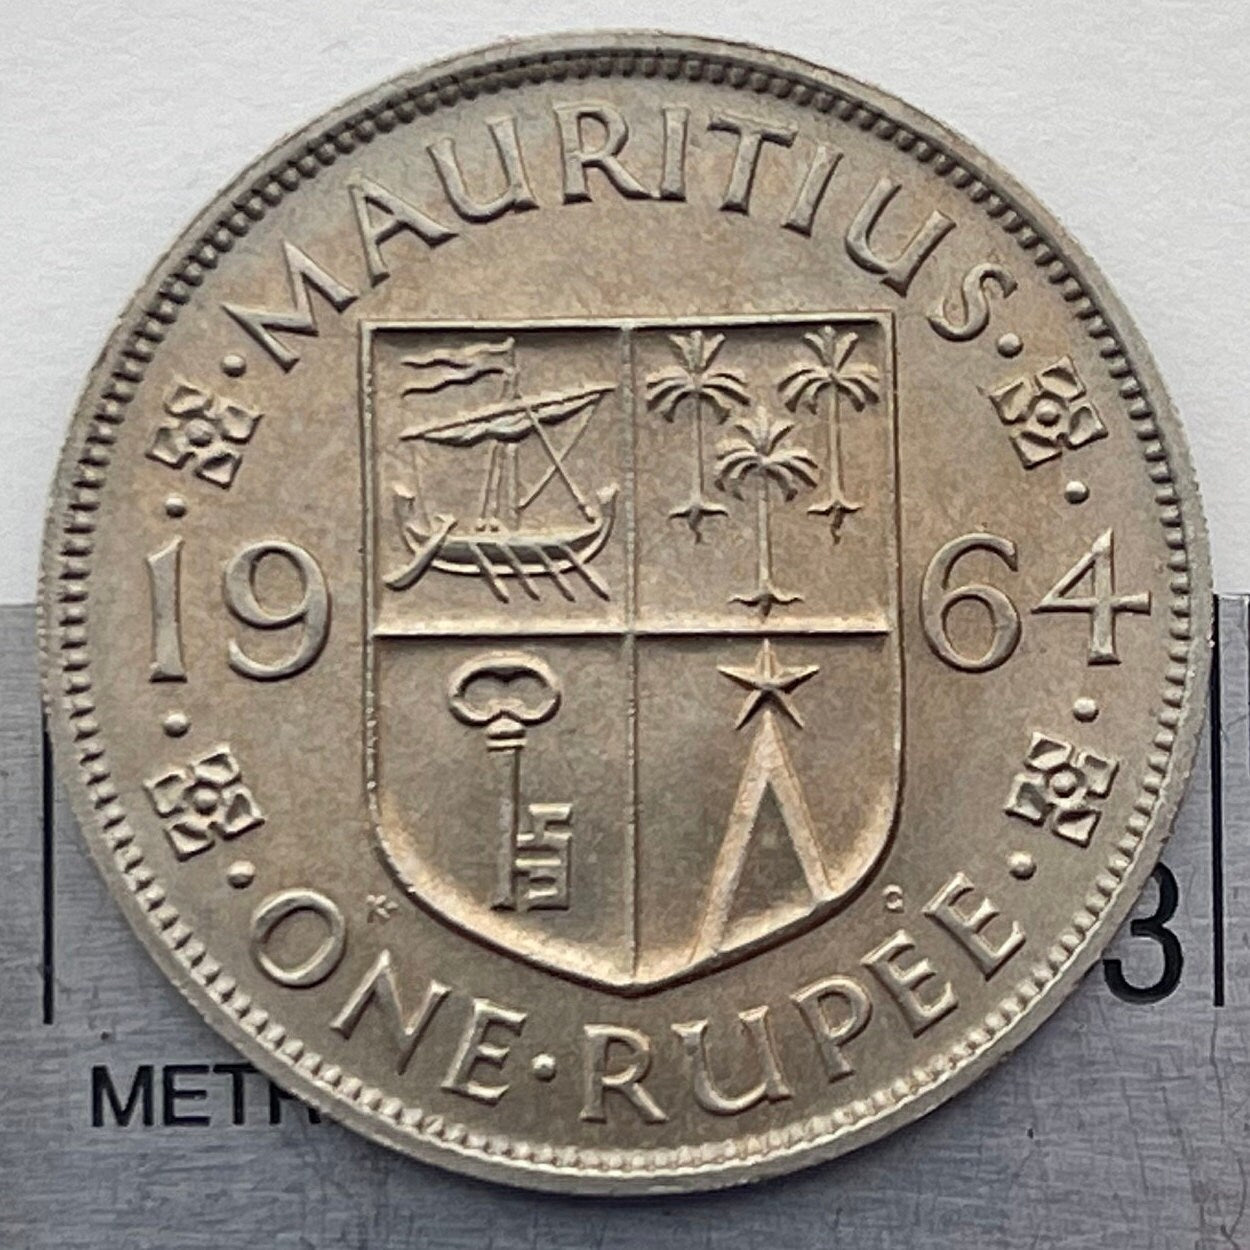 Galley, Palms, Key, Star 1 Rupee Mauritius Authentic Coin Money for Jewelry and Craft Making (Elizabeth II) (Tudor Crown) 1964